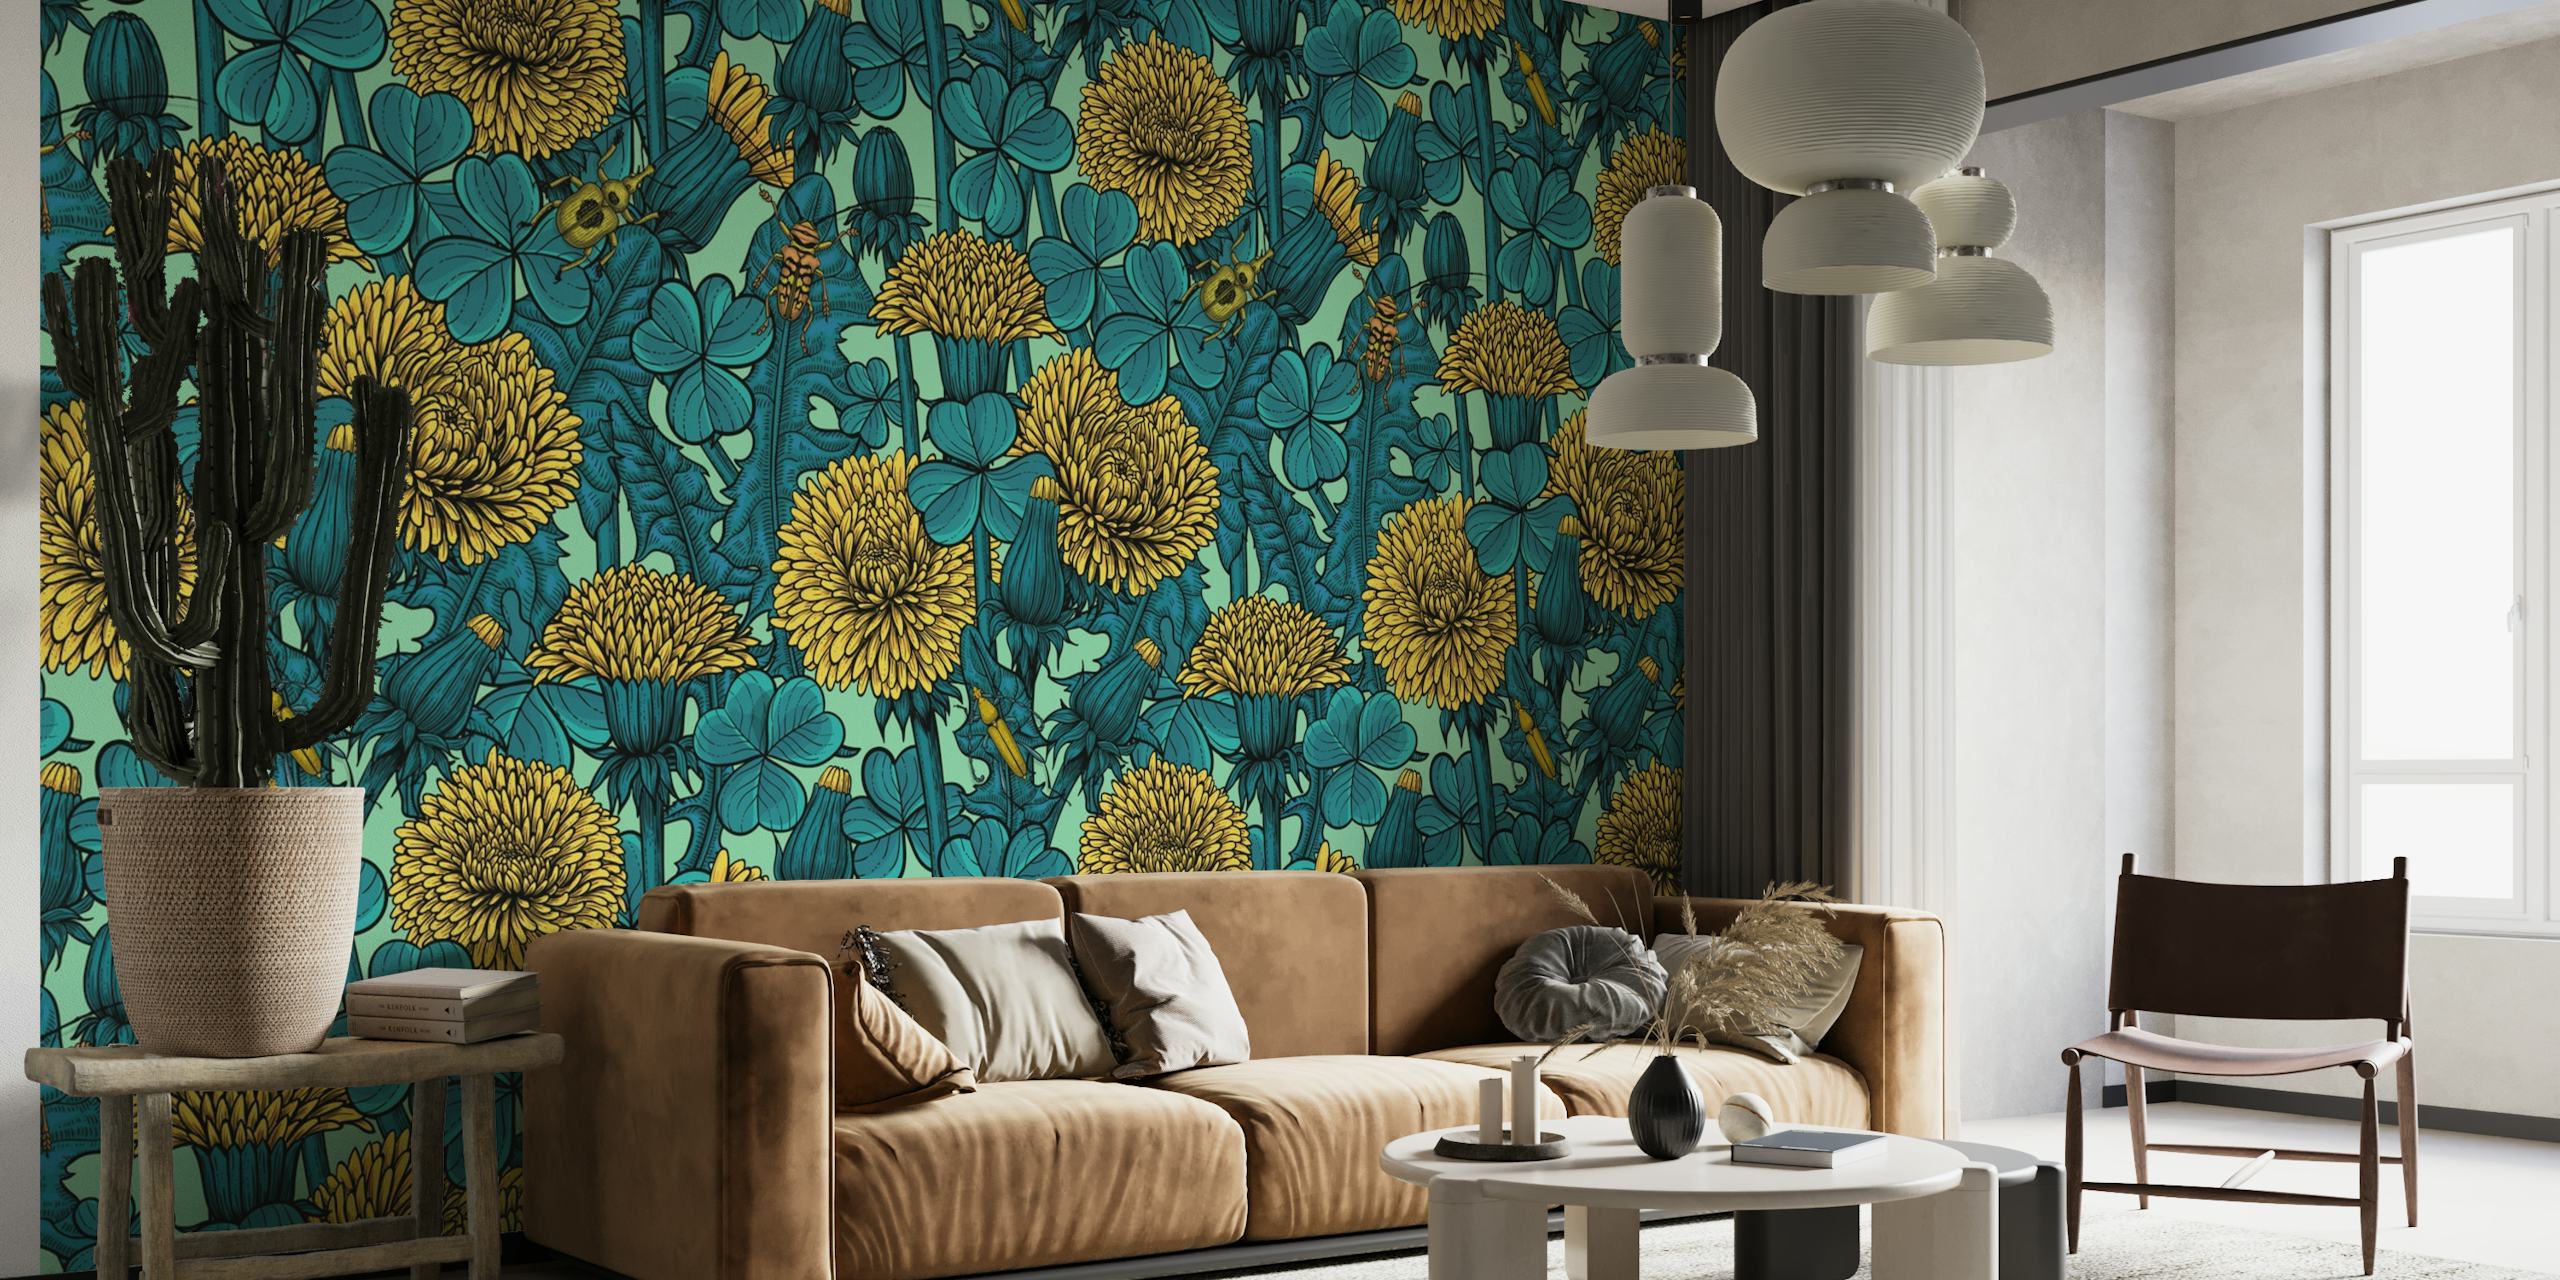 Vibrant teal wall mural with golden dandelions and green clovers pattern